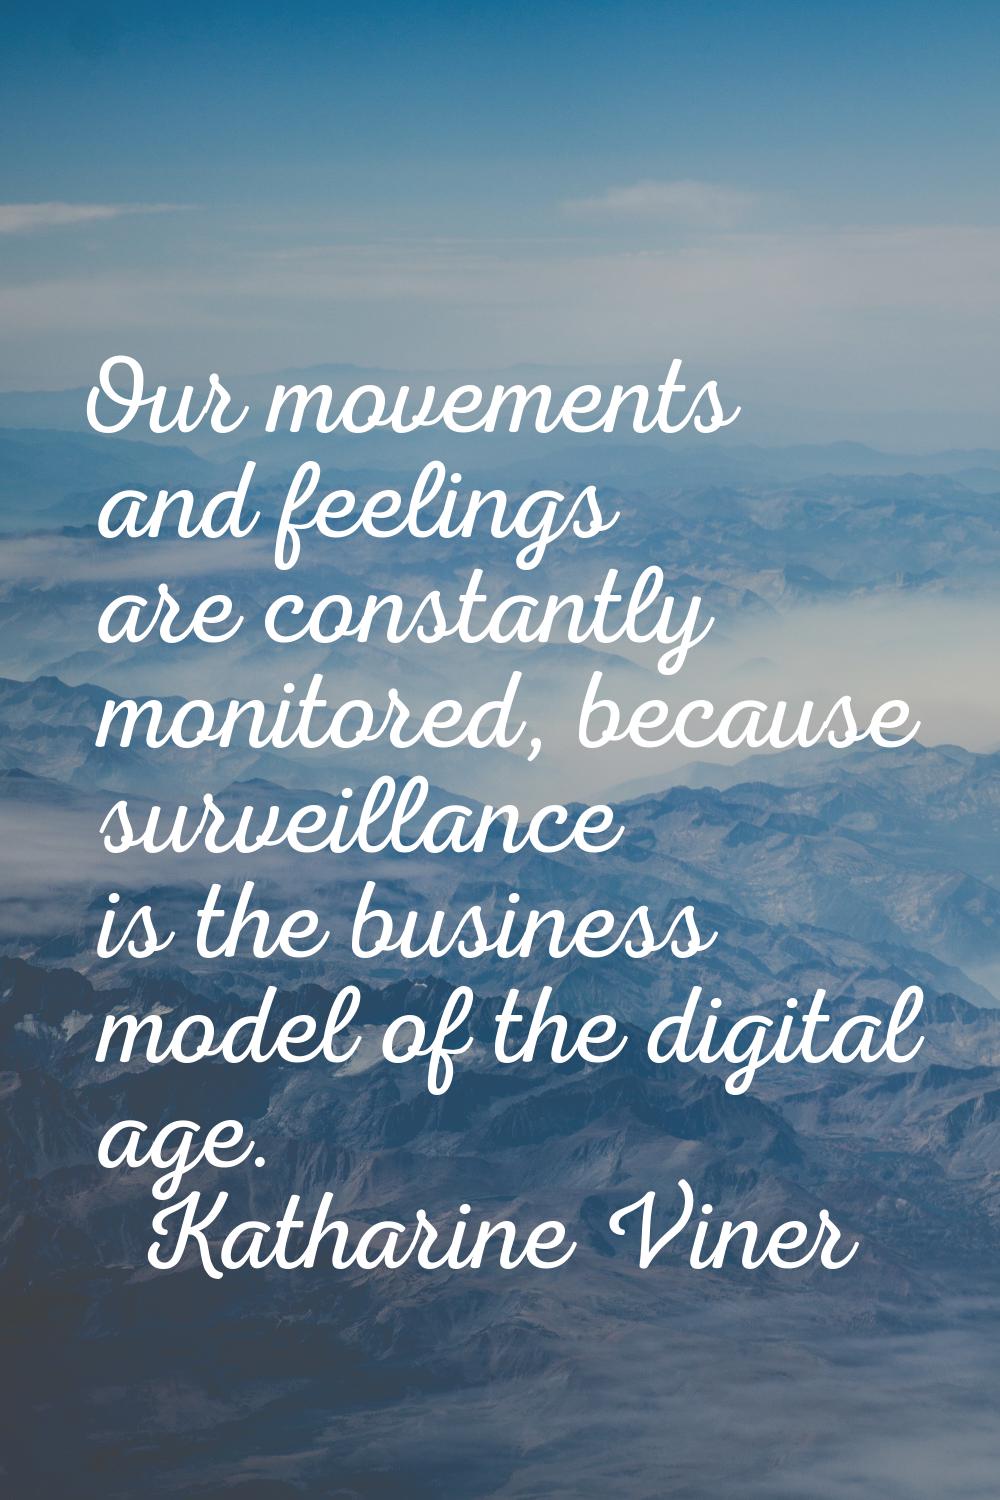 Our movements and feelings are constantly monitored, because surveillance is the business model of 